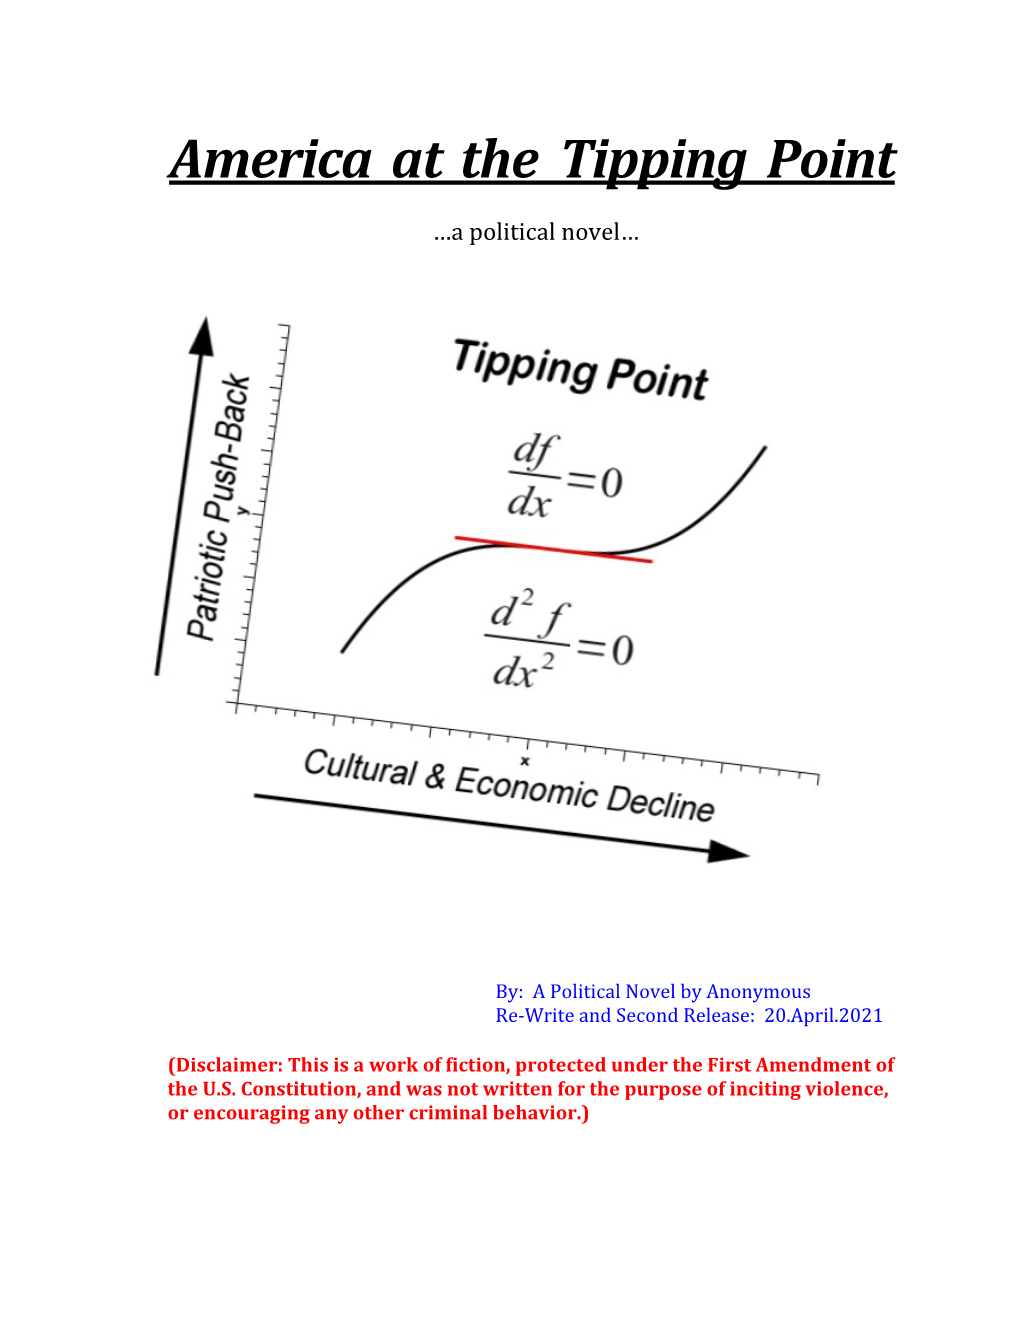 America at the Tipping Point